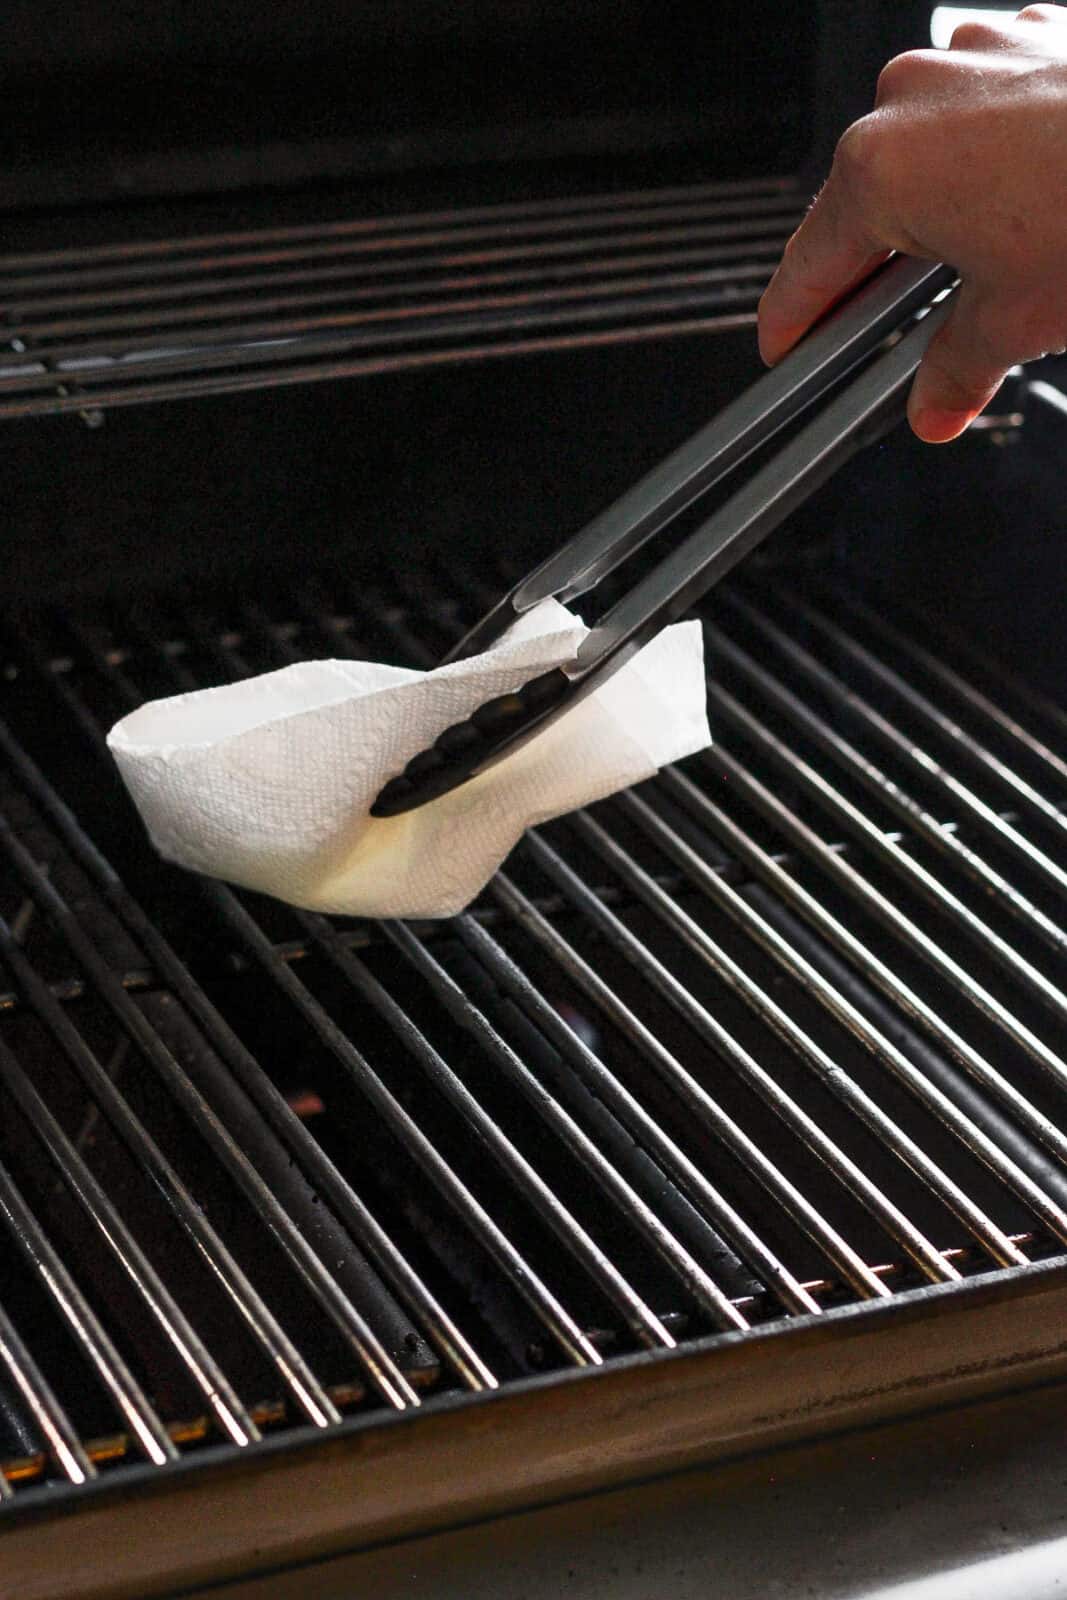 Hot grill grates being rubbed down with a paper towel that has olive oil on it.